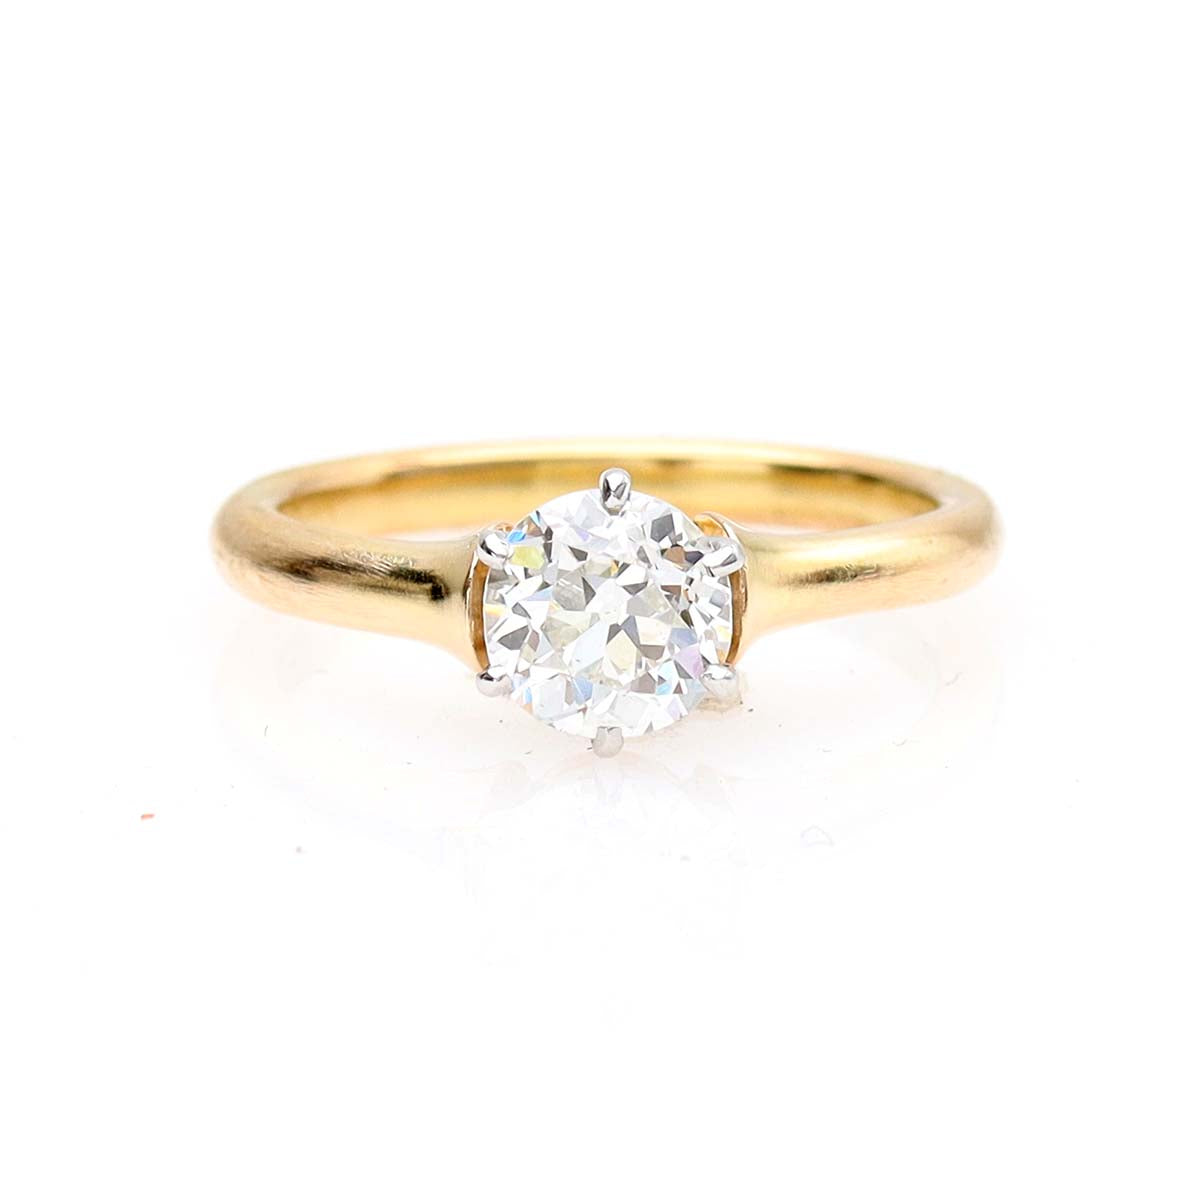 Early 1900s Old European Cut Diamond engagement ring #VR230516-2